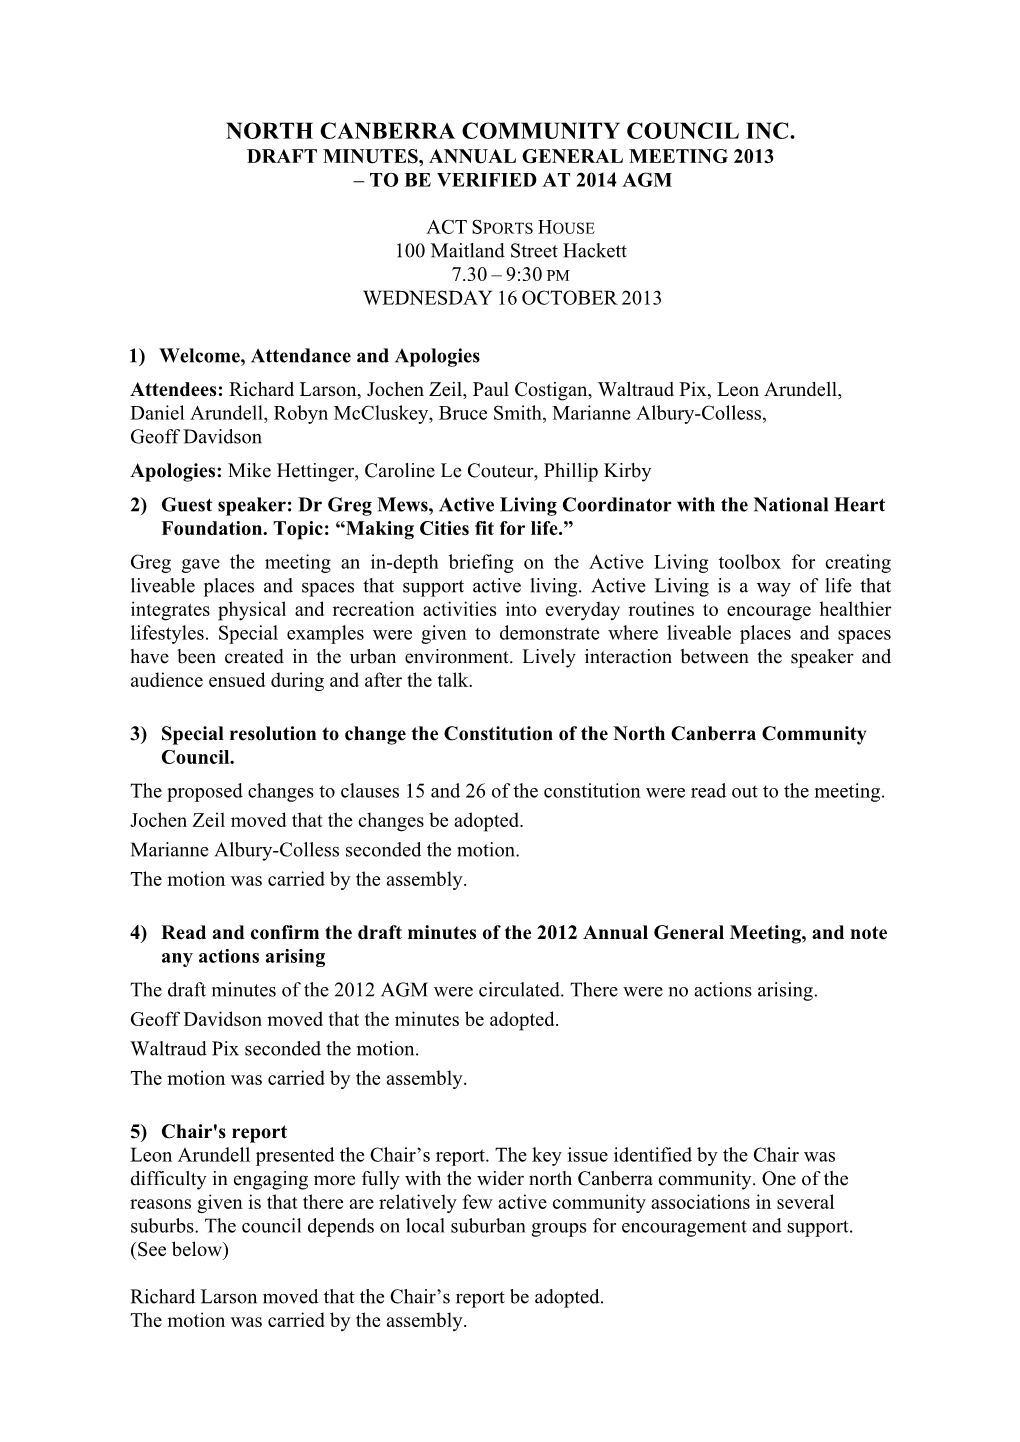 North Canberra Community Council Inc. Draft Minutes, Annual General Meeting 2013 – to Be Verified at 2014 Agm